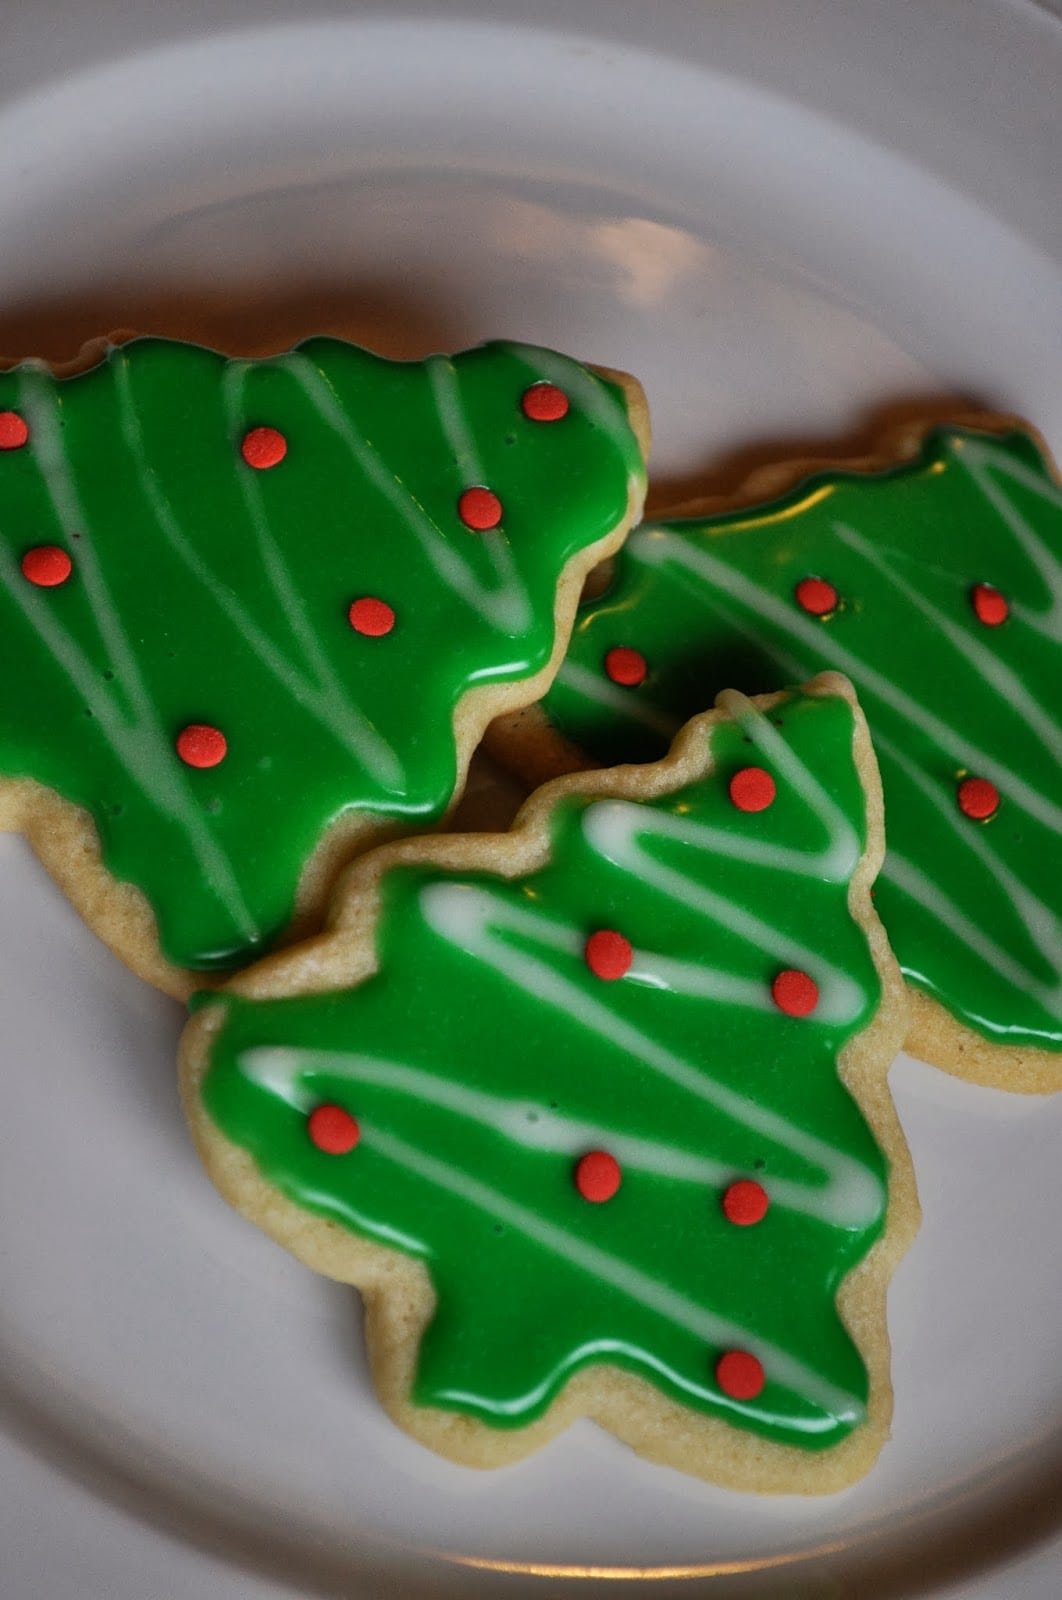 Our Italian Kitchen  Christmas Sugar Cookies With Glaze Icing